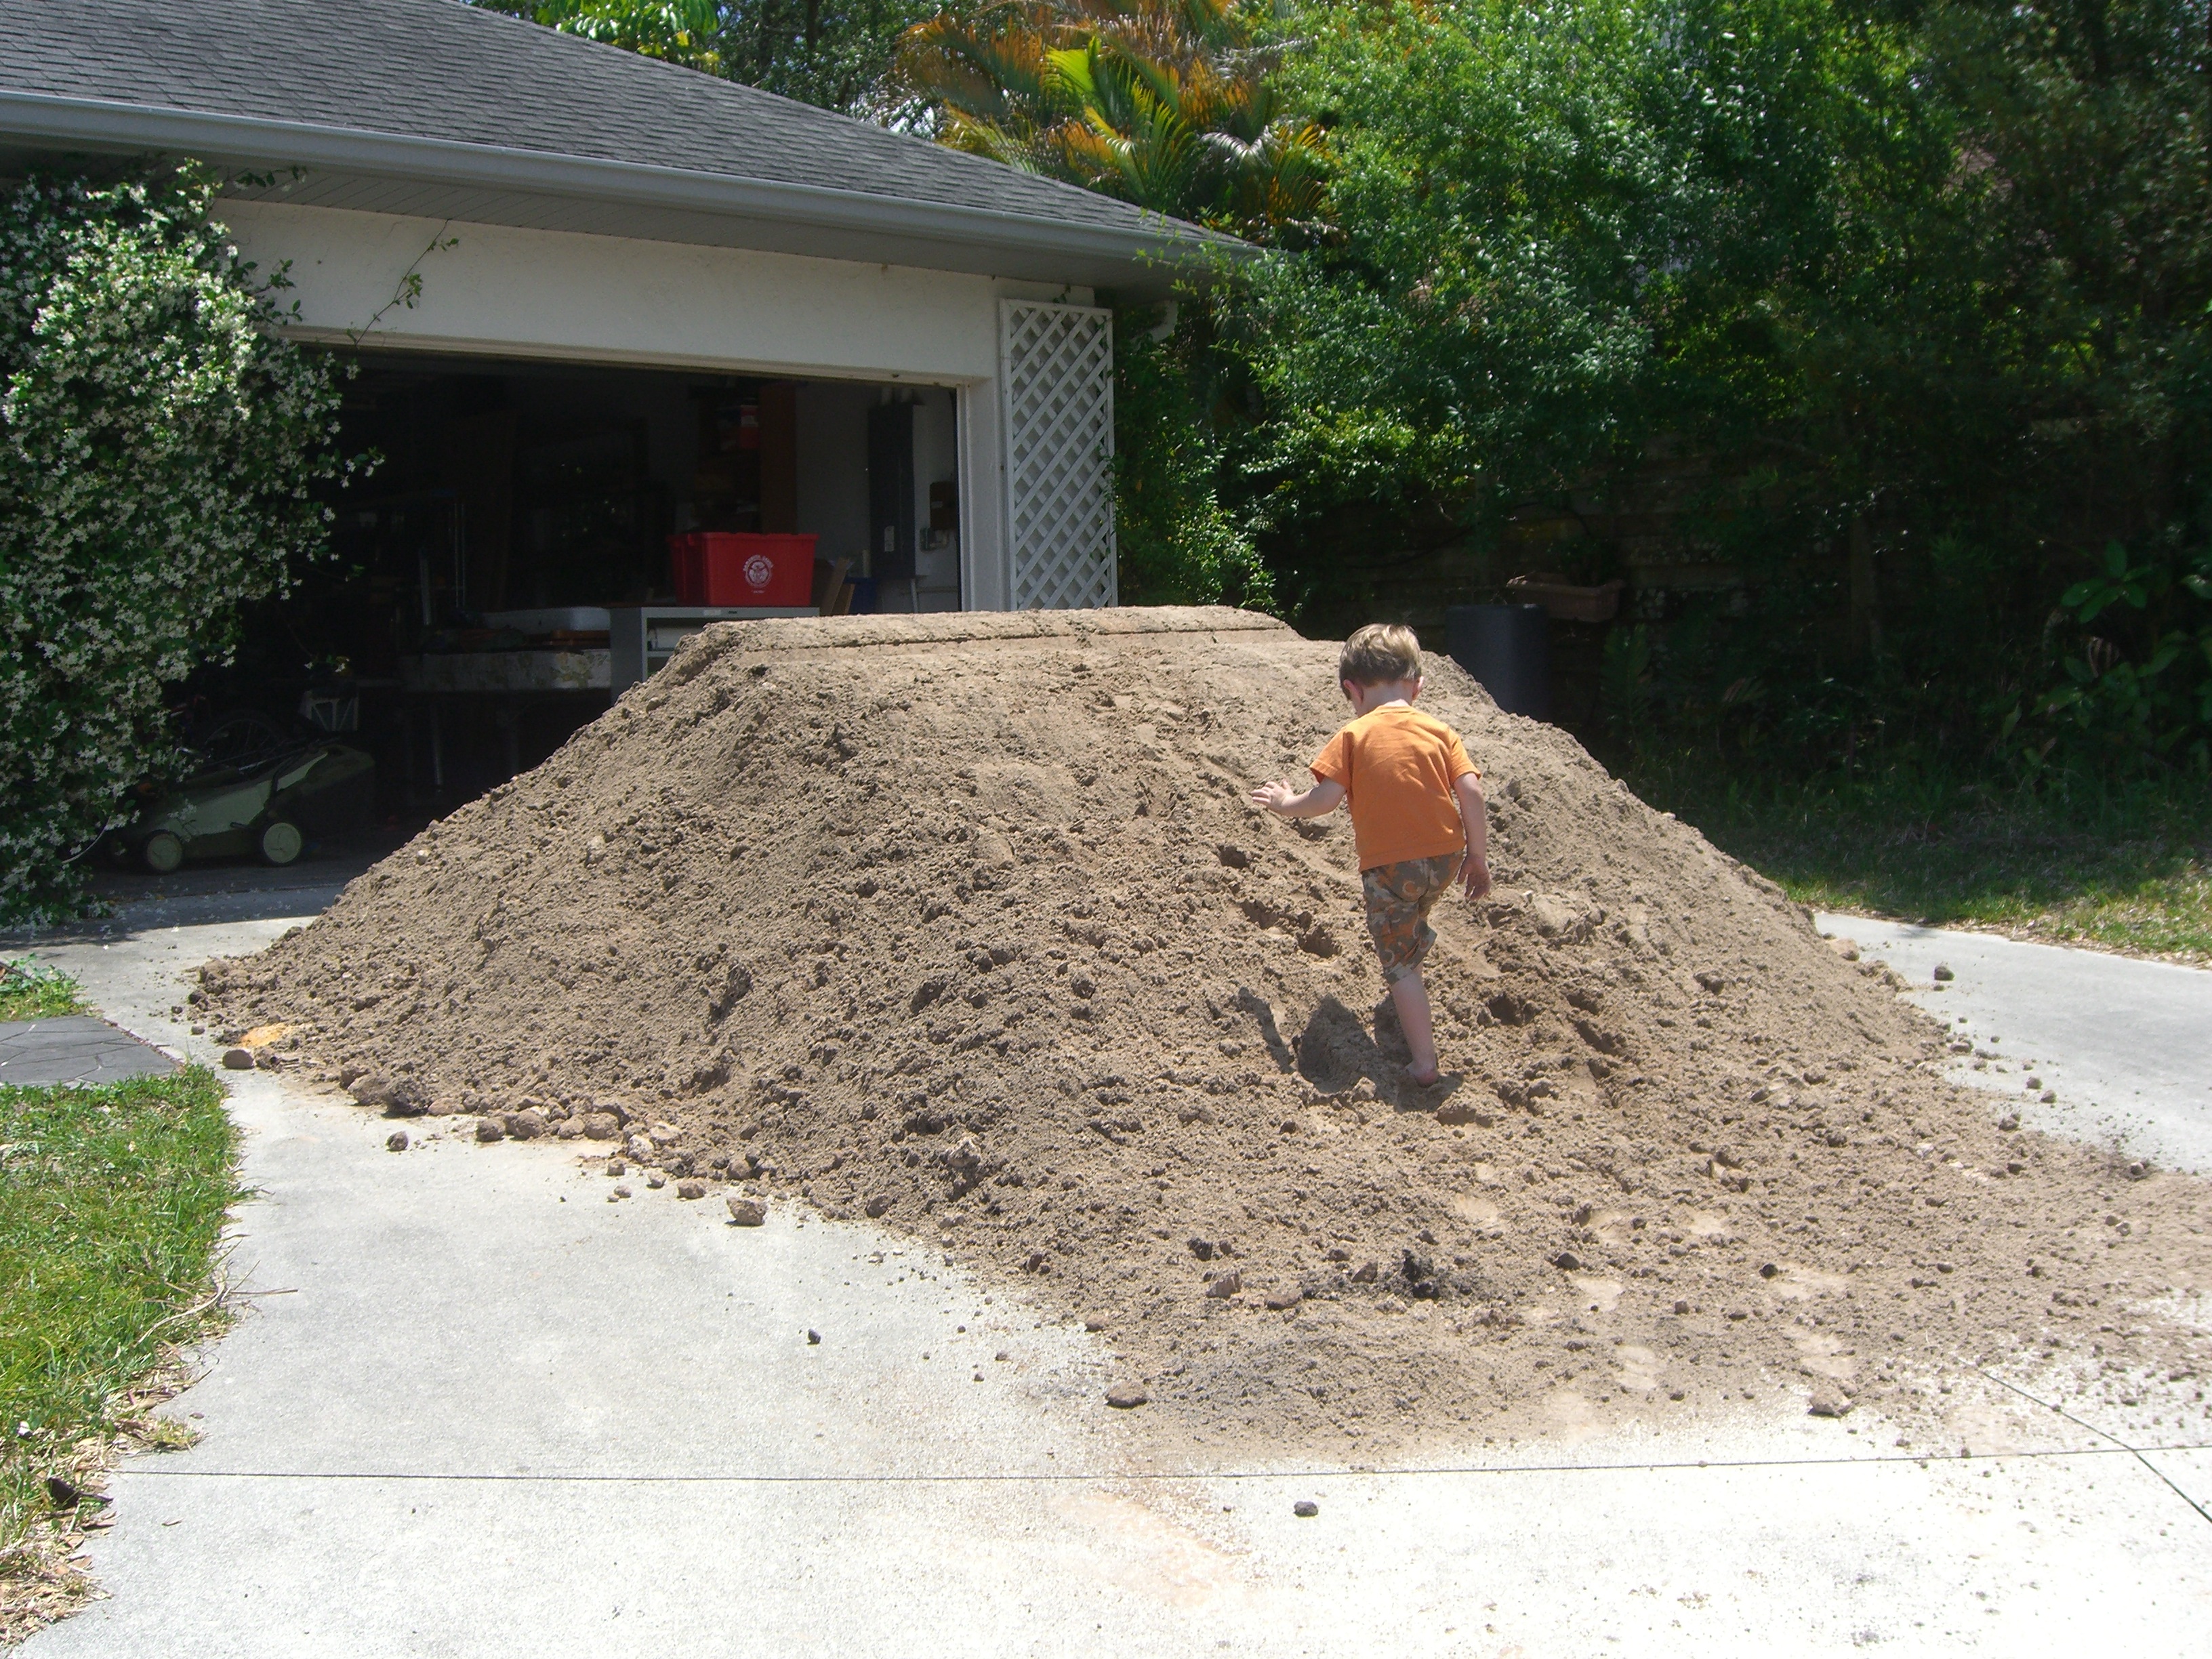 Ordered a truckload of fill. It had to be dumped on our driveway since the backyard is inaccessible. This turned out to be a wonderful playground for Liam and his cousins